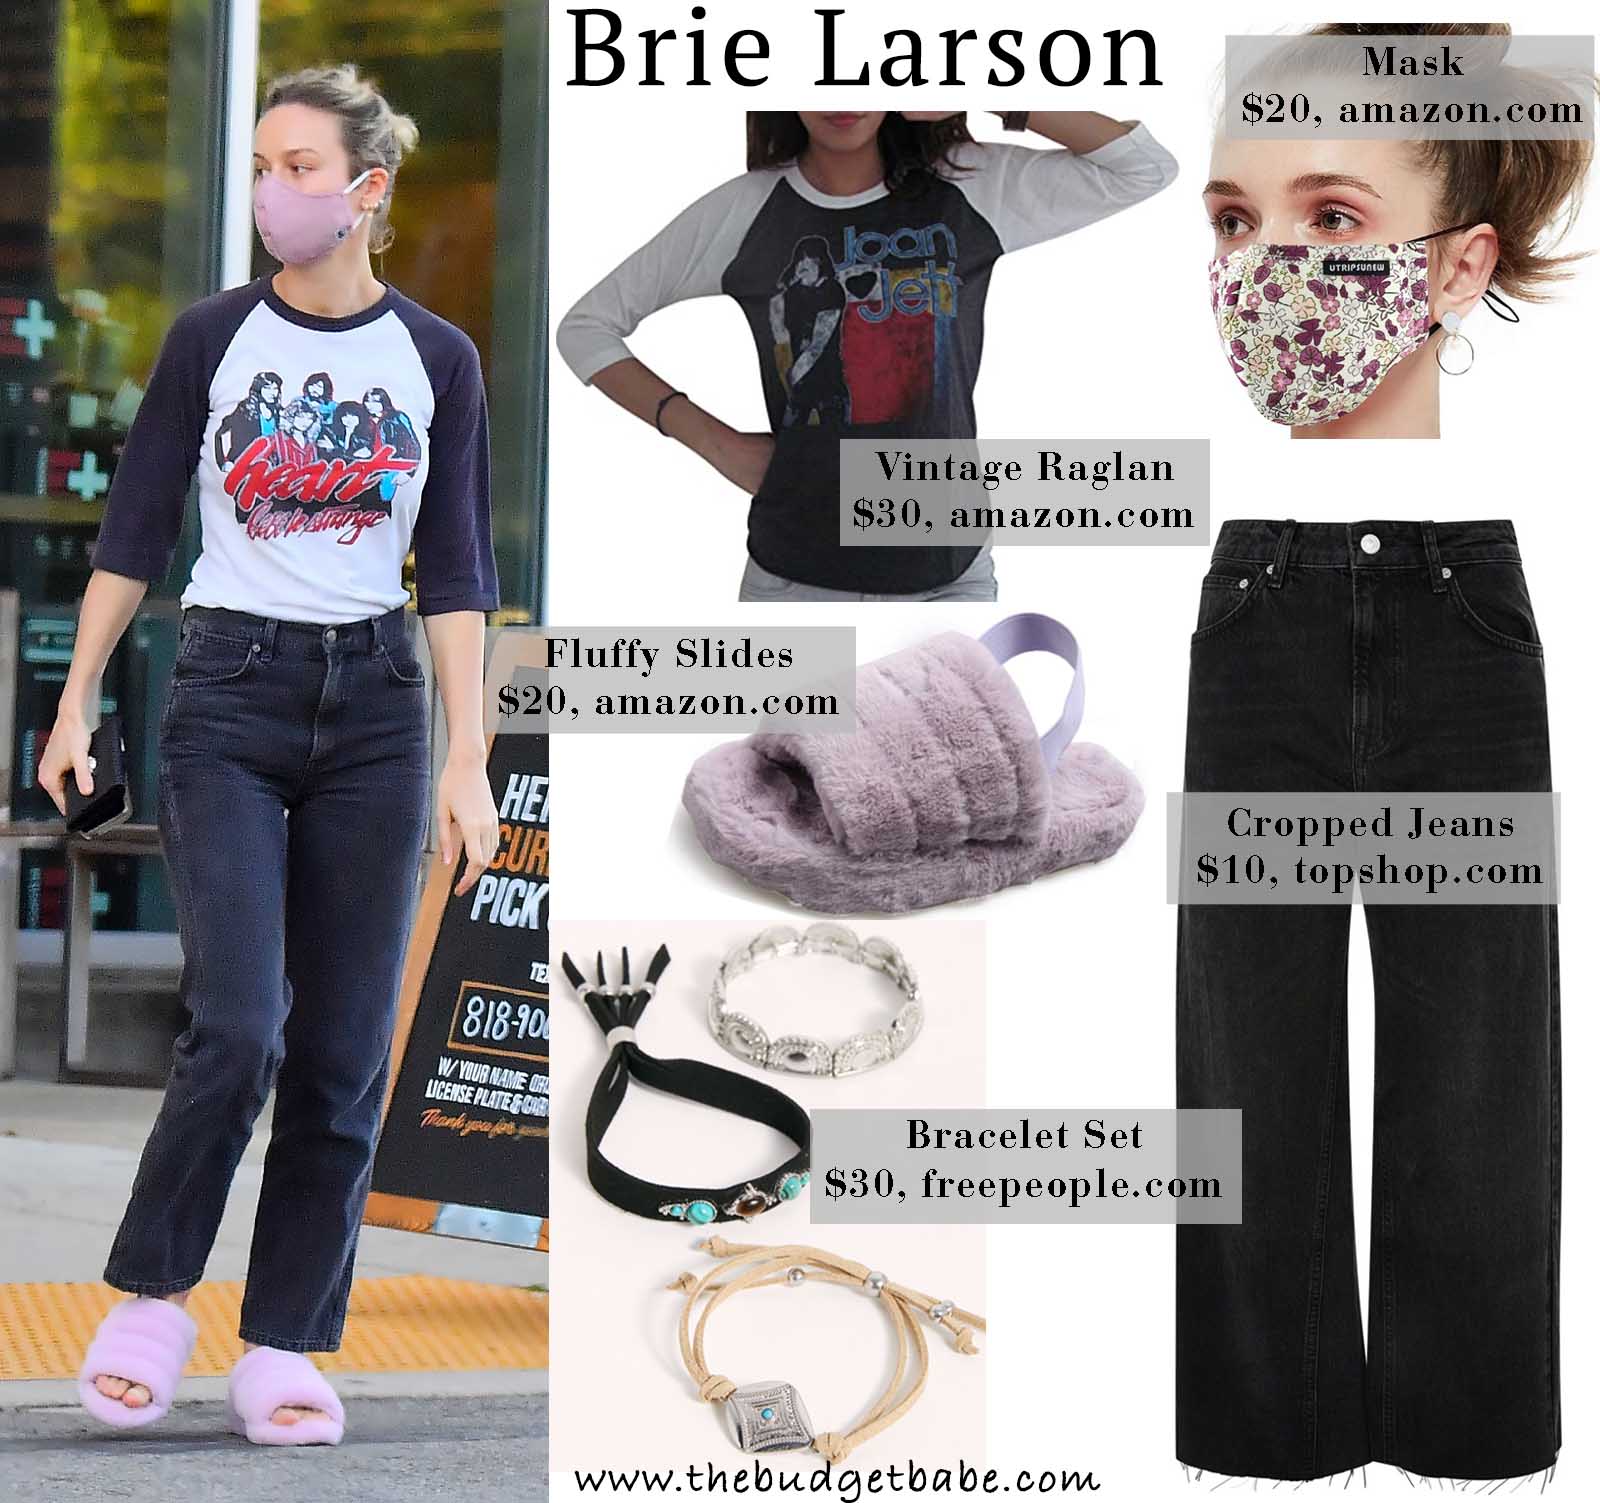 Brie Larson rocks a band tee and jeans.